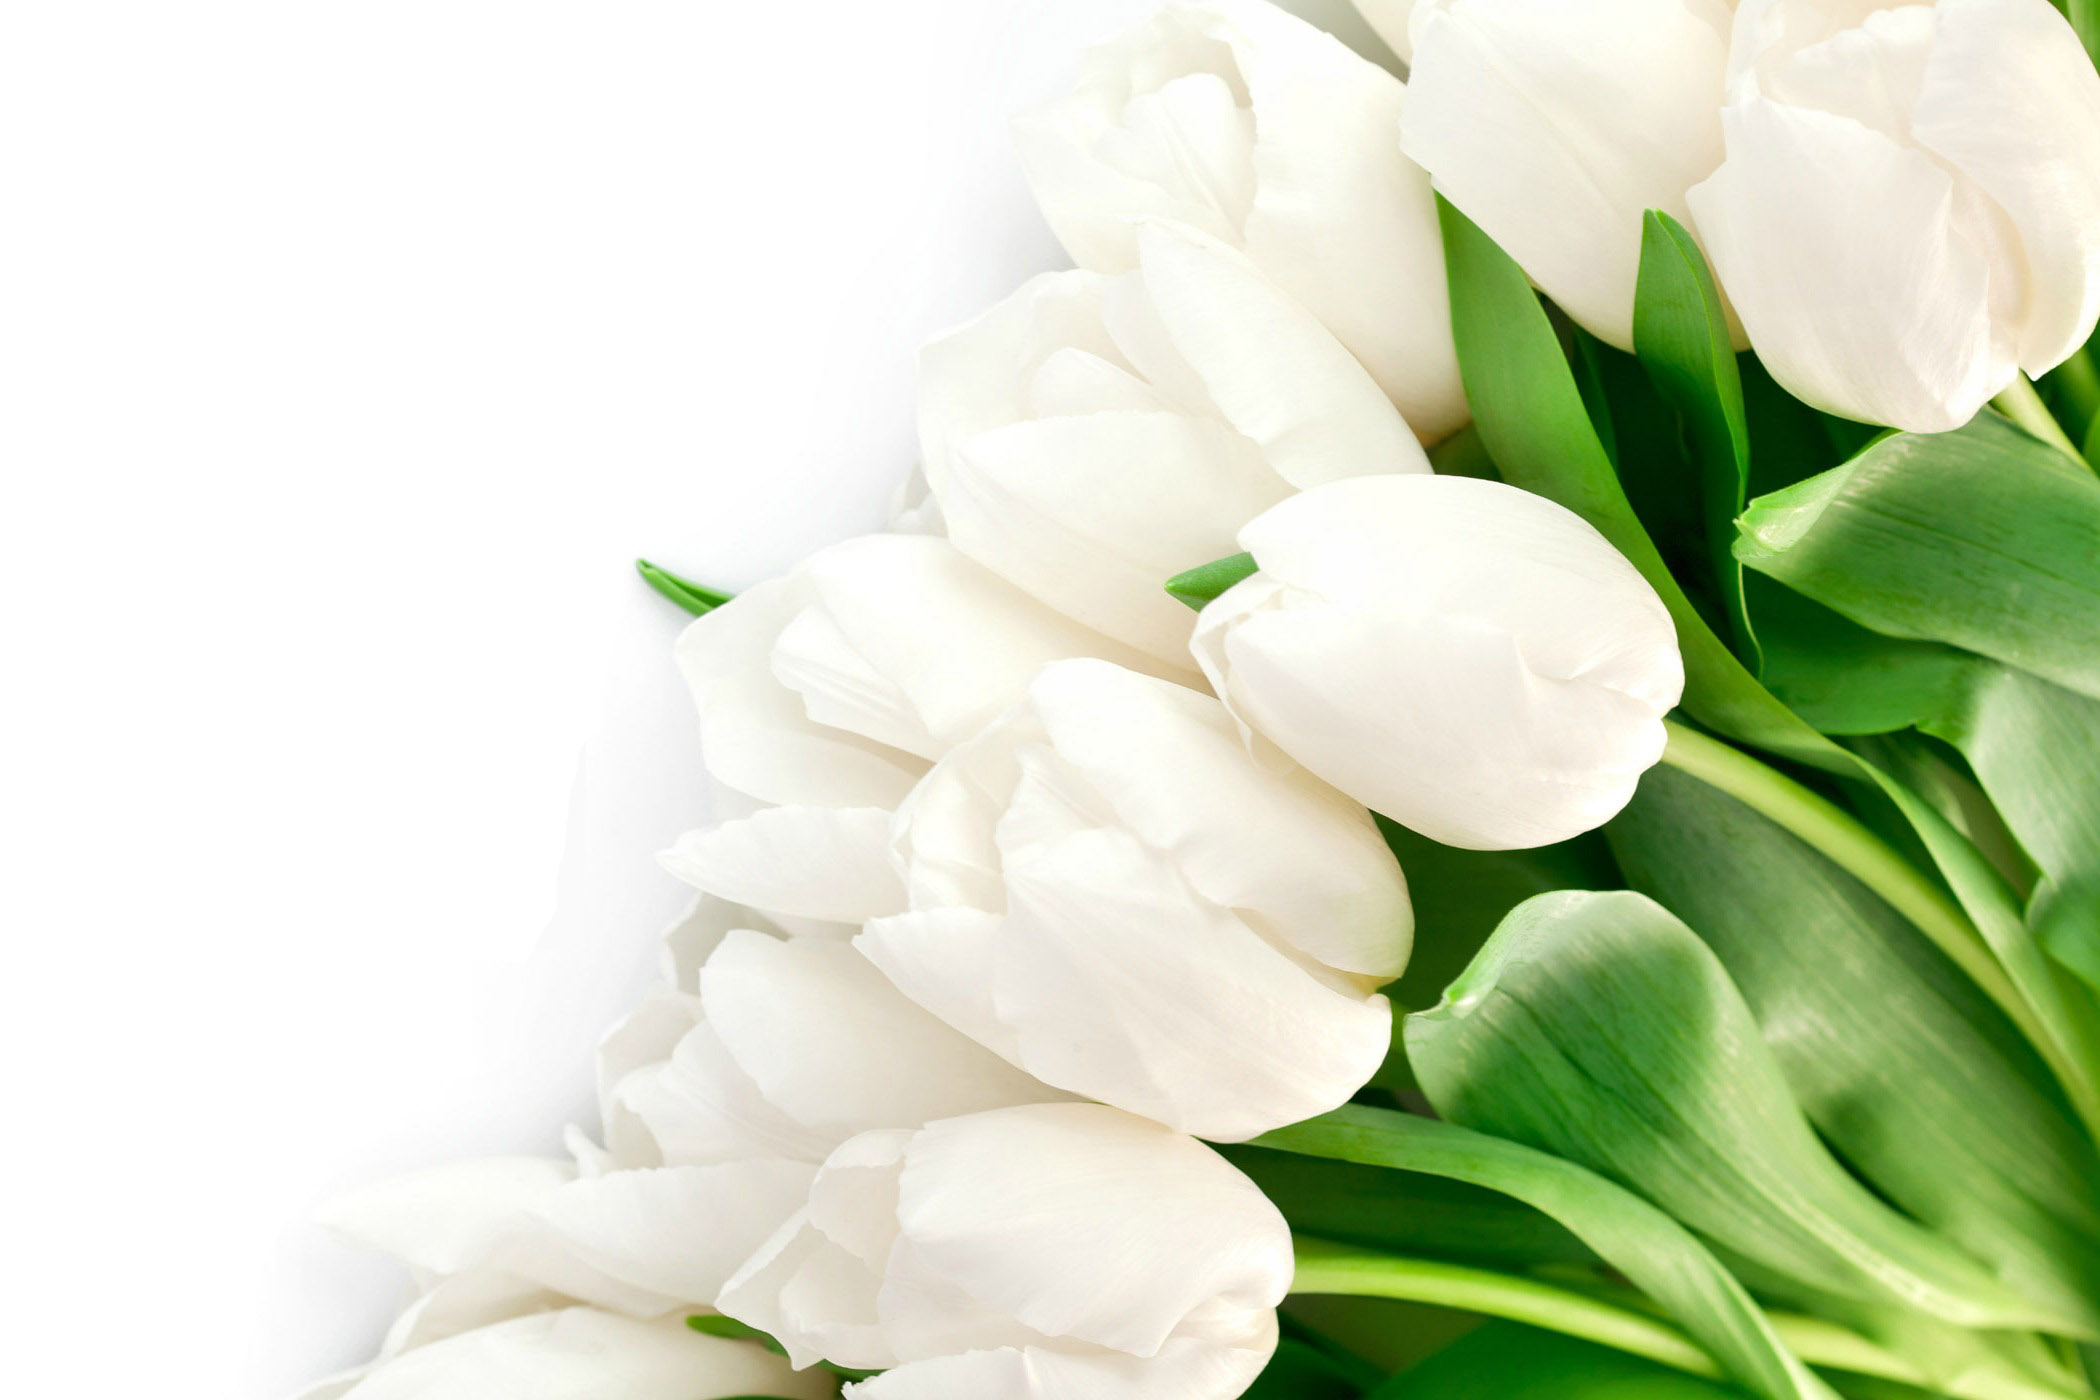 hd wallpaper lovely white tulips images free